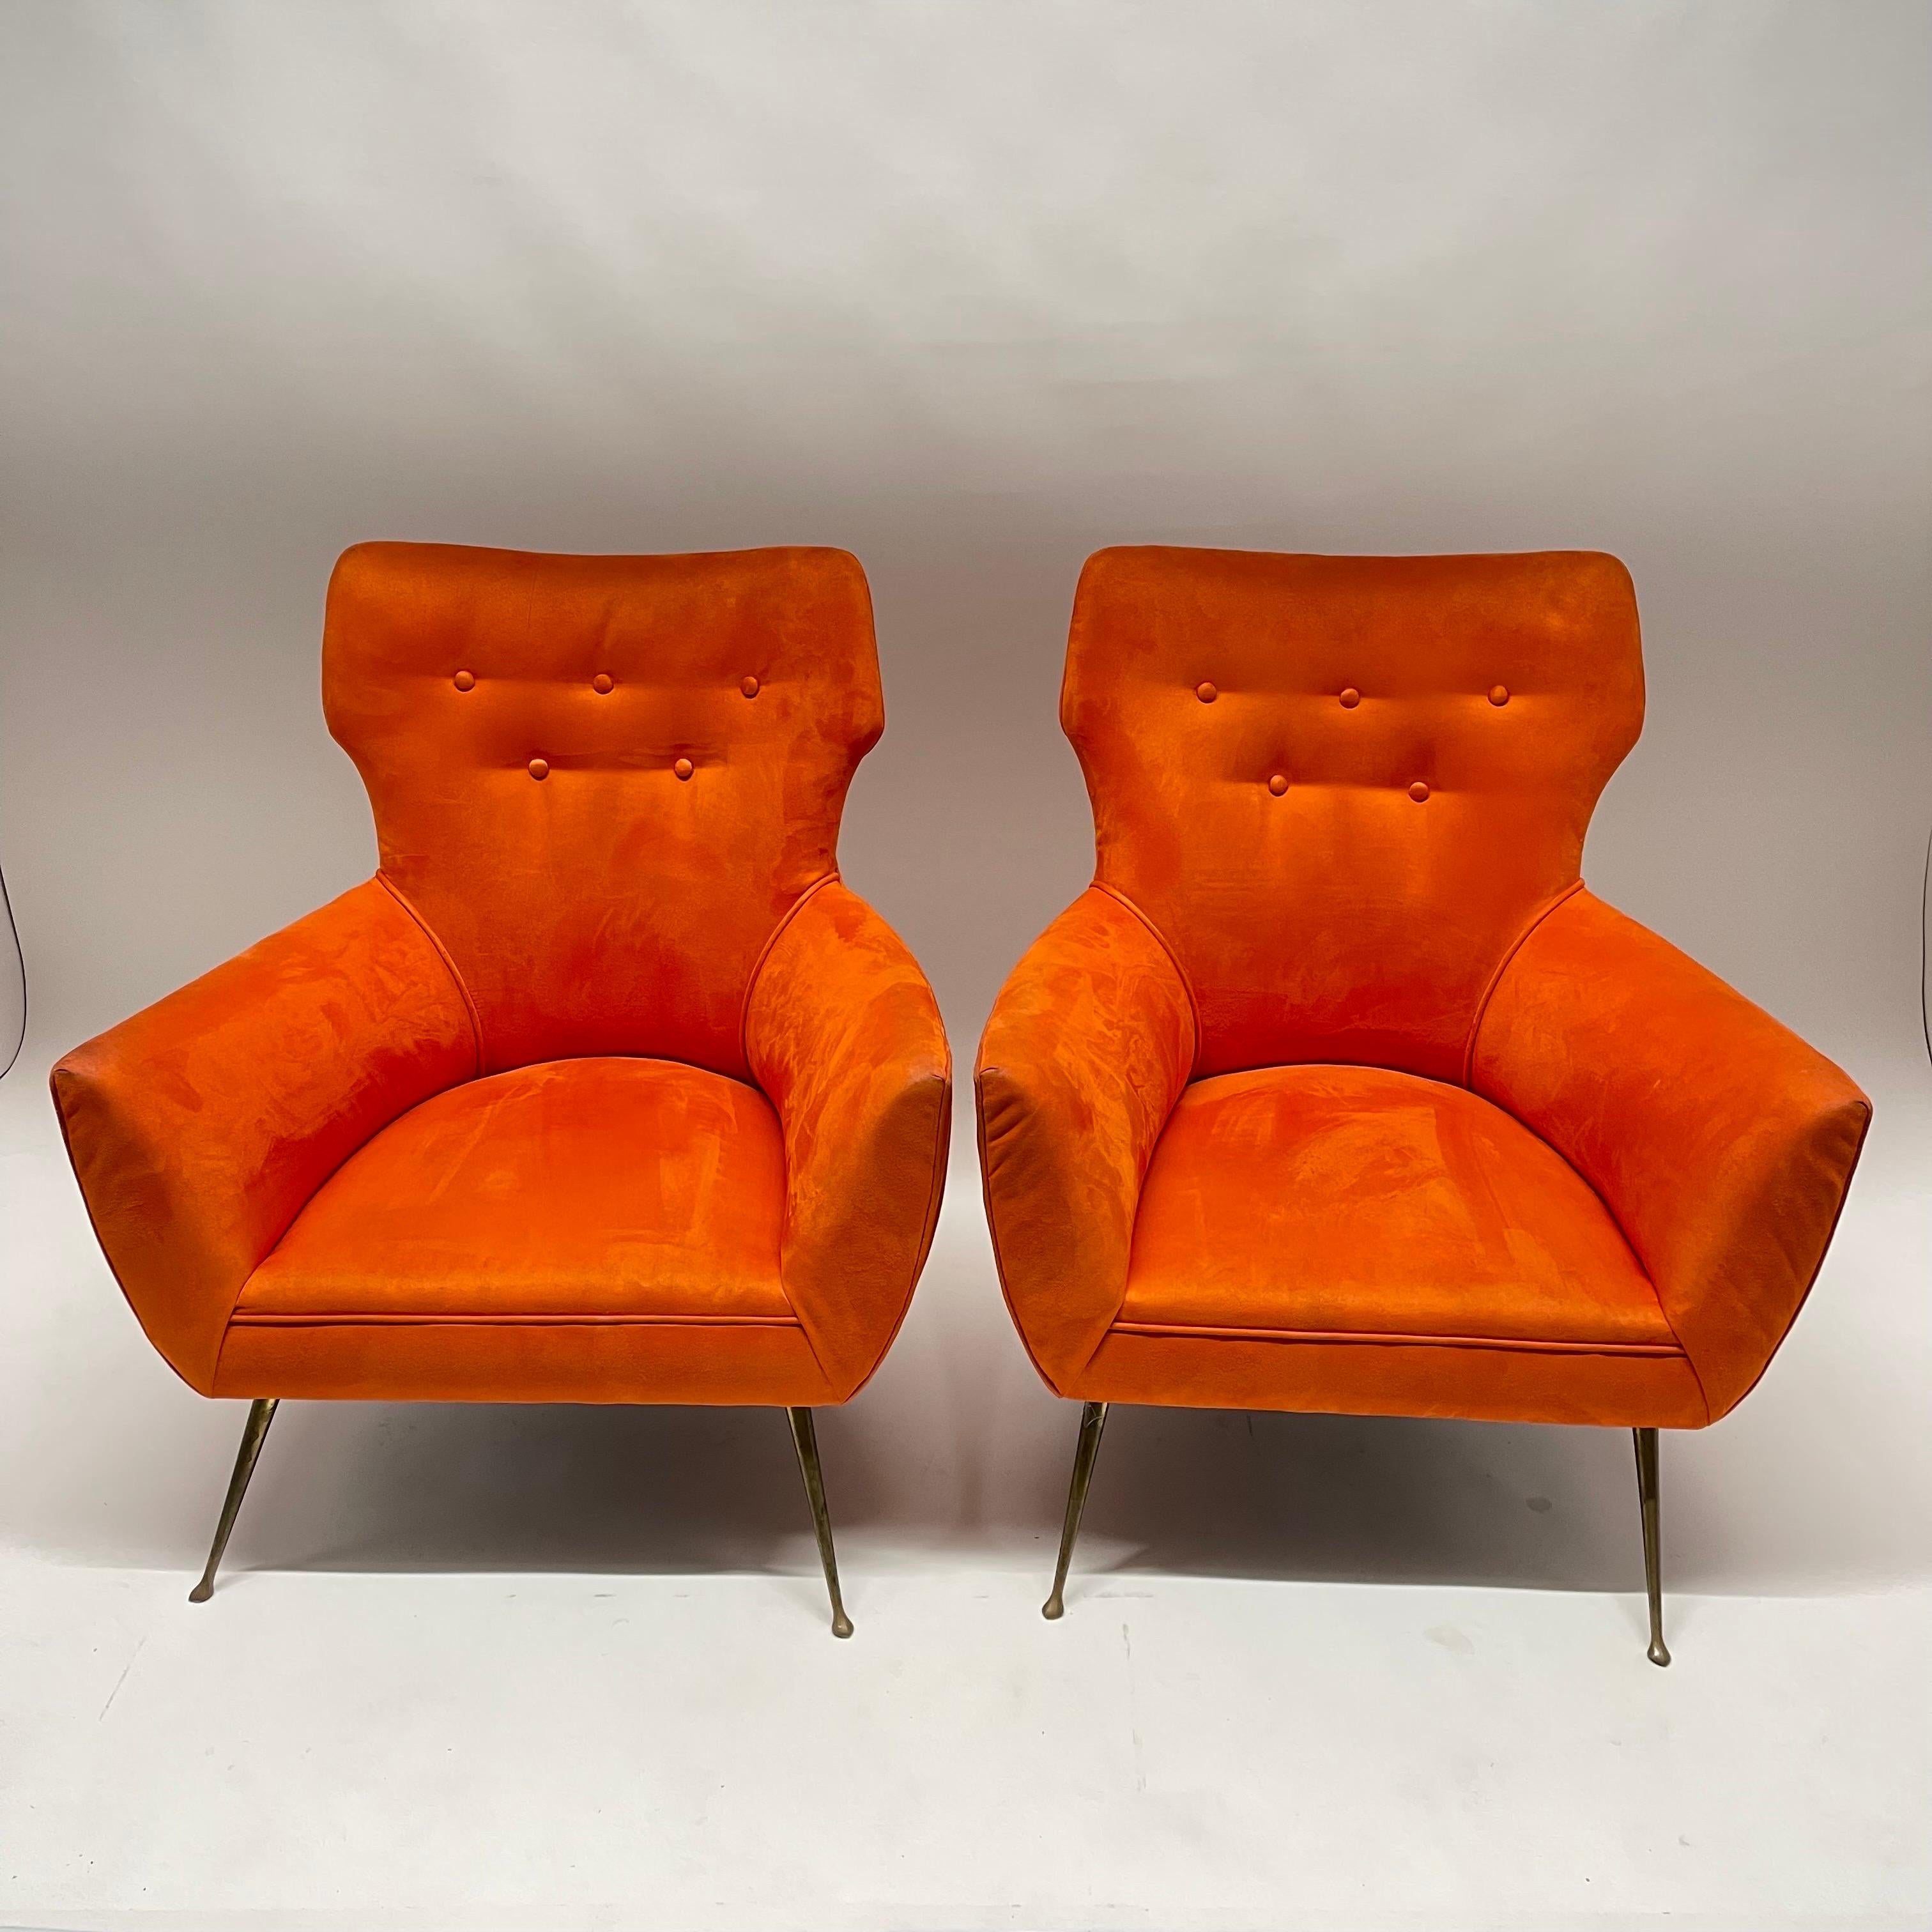 Pair of sculptural Italian midcentury arm club or lounge chairs, rendered in orange ultra suede with splayed brass legs, ISA, Italy, circa 1950s.